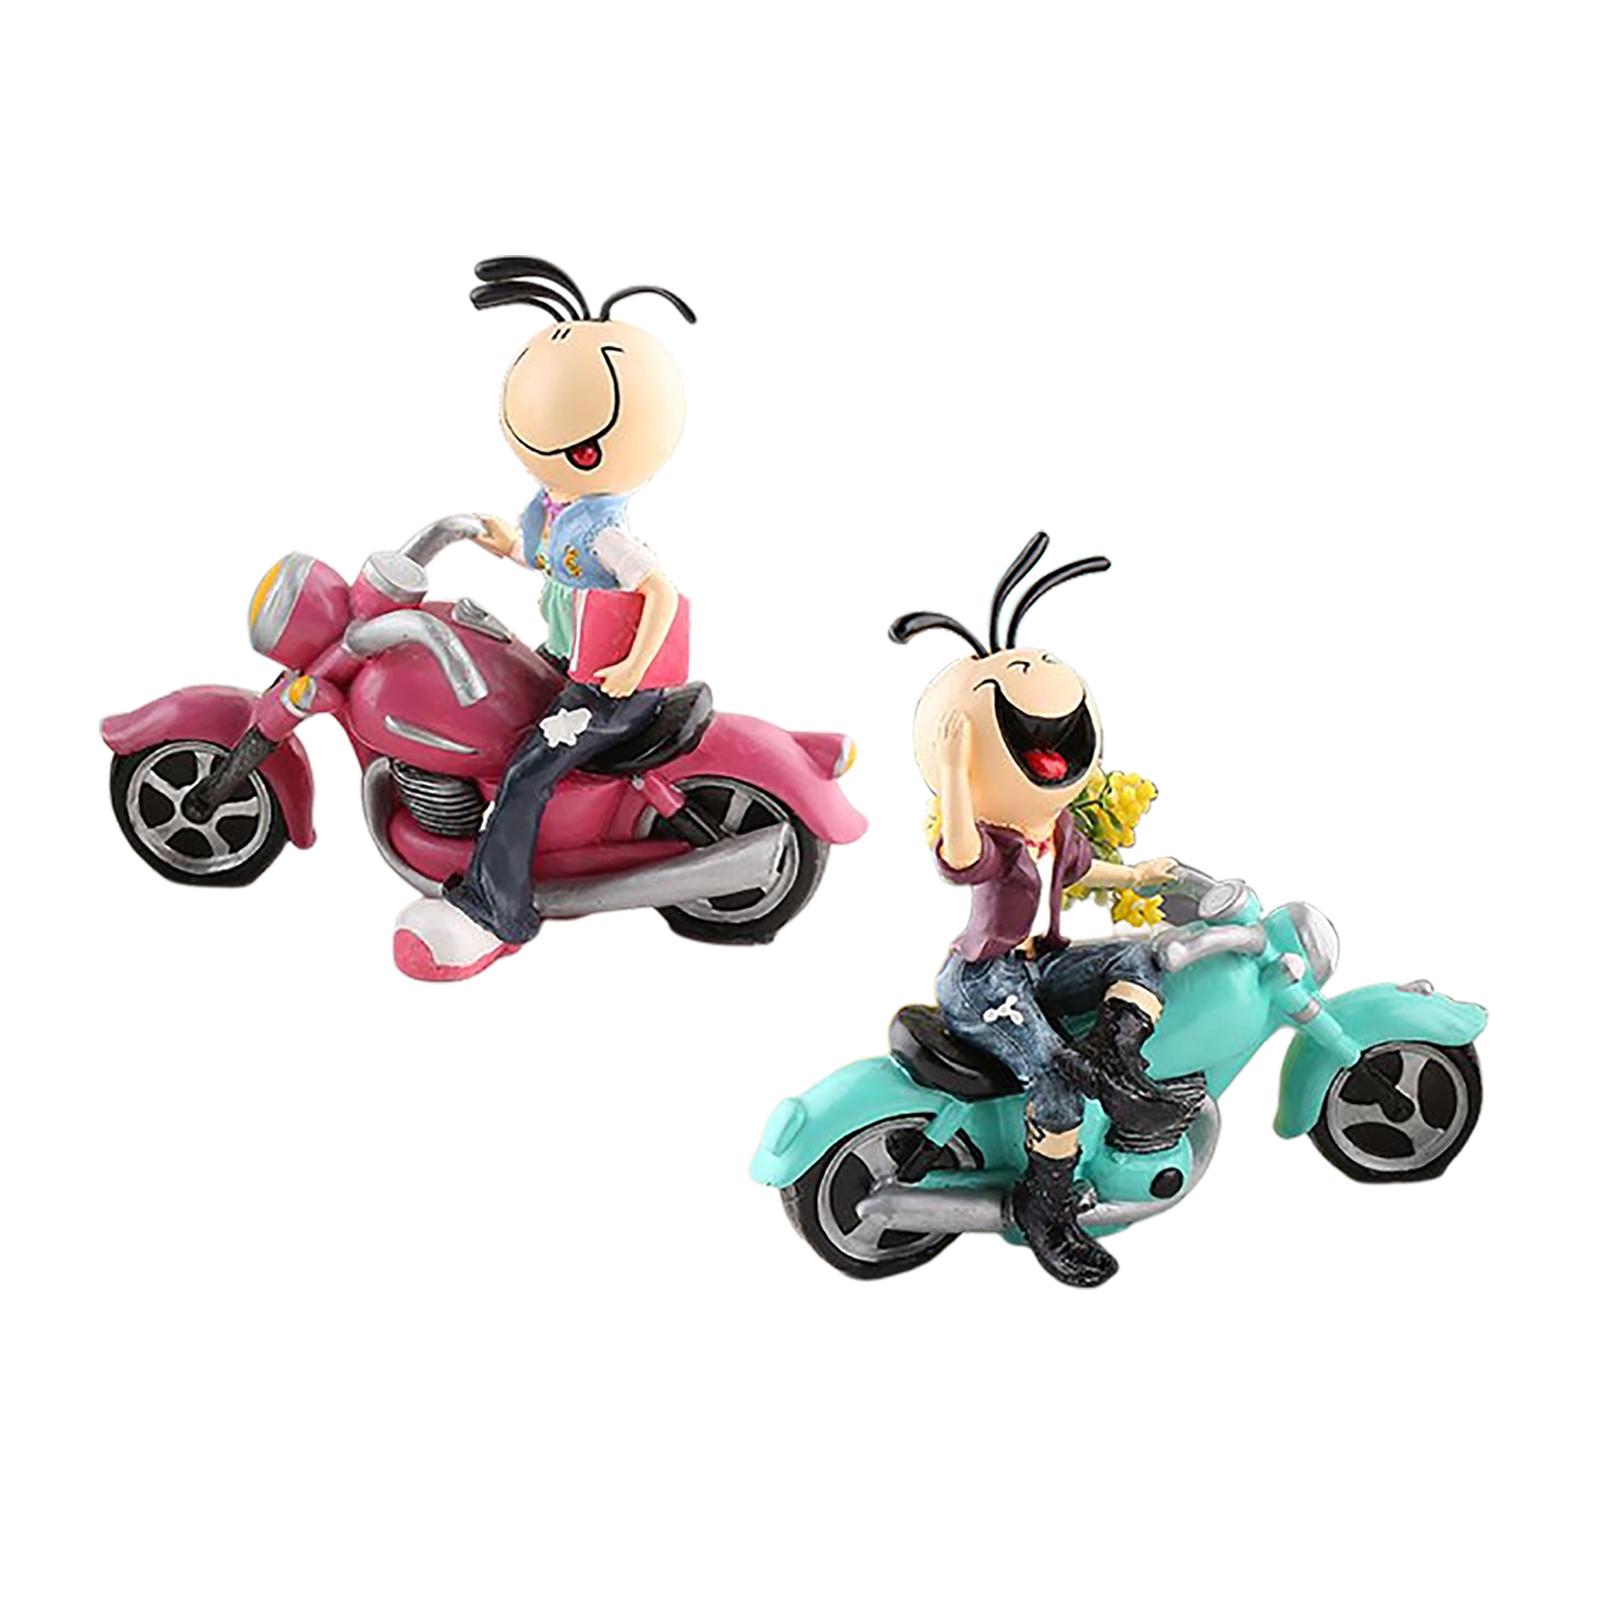 2Pcs Motorcycle Doll Statue Small Figurines for Tabletop Office Bedroom